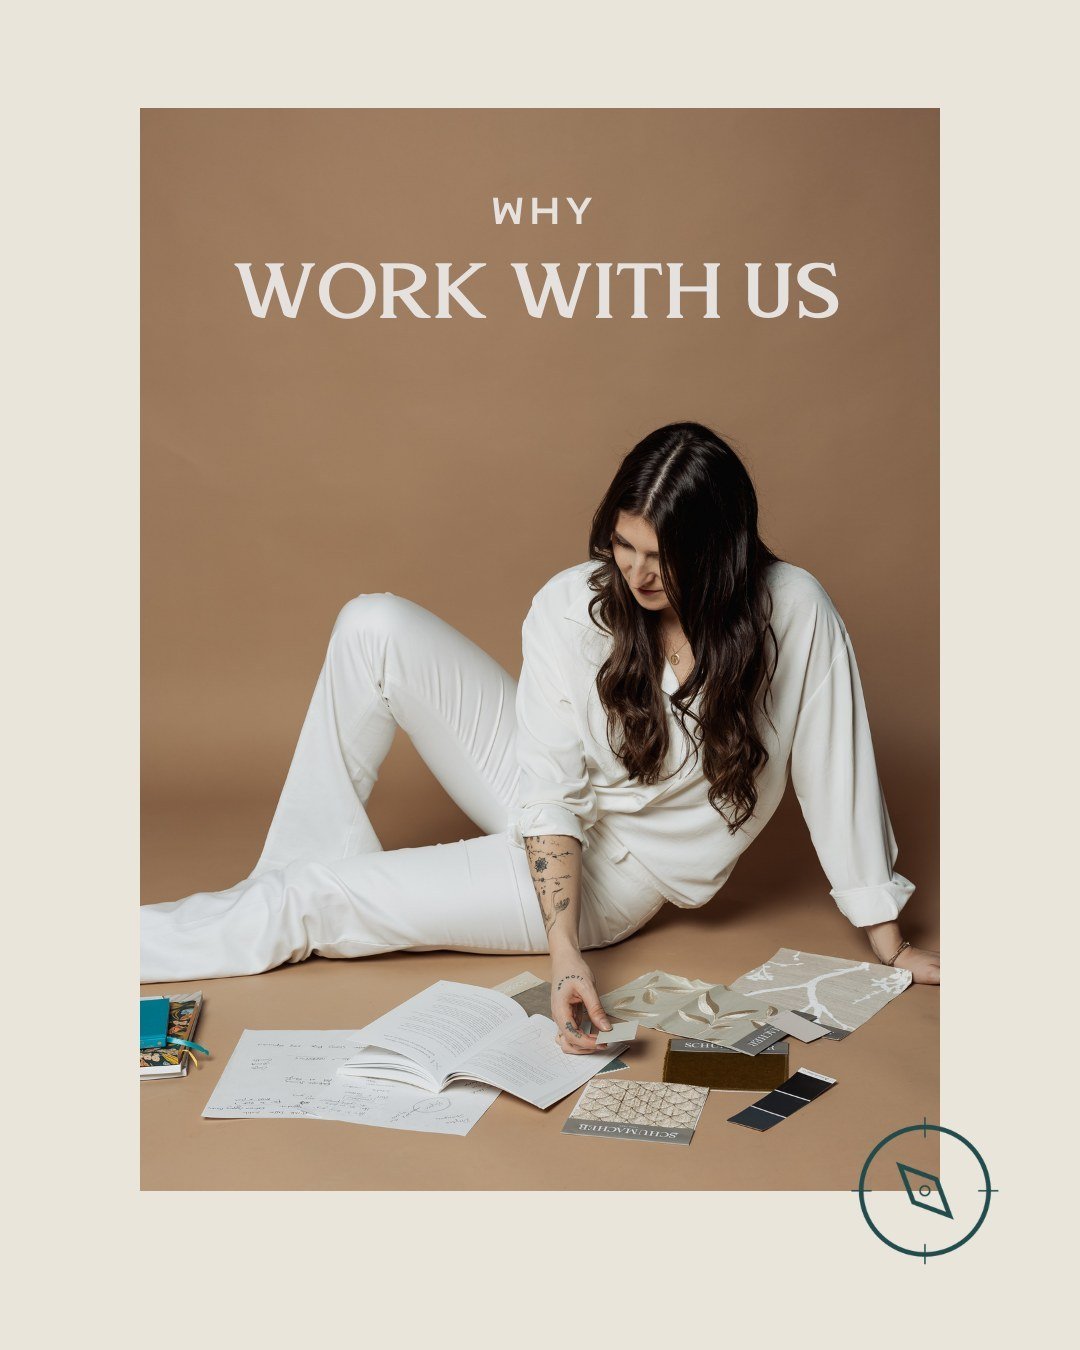 As a business owner or CEO, you know you can't grow your business if you&rsquo;re doing it all.⁠
⁠
You need the right support so you can get back to operating in your zone of genius. ⁠
⁠
Which is where we come in. ⁠
⁠
We are uniquely positioned and i